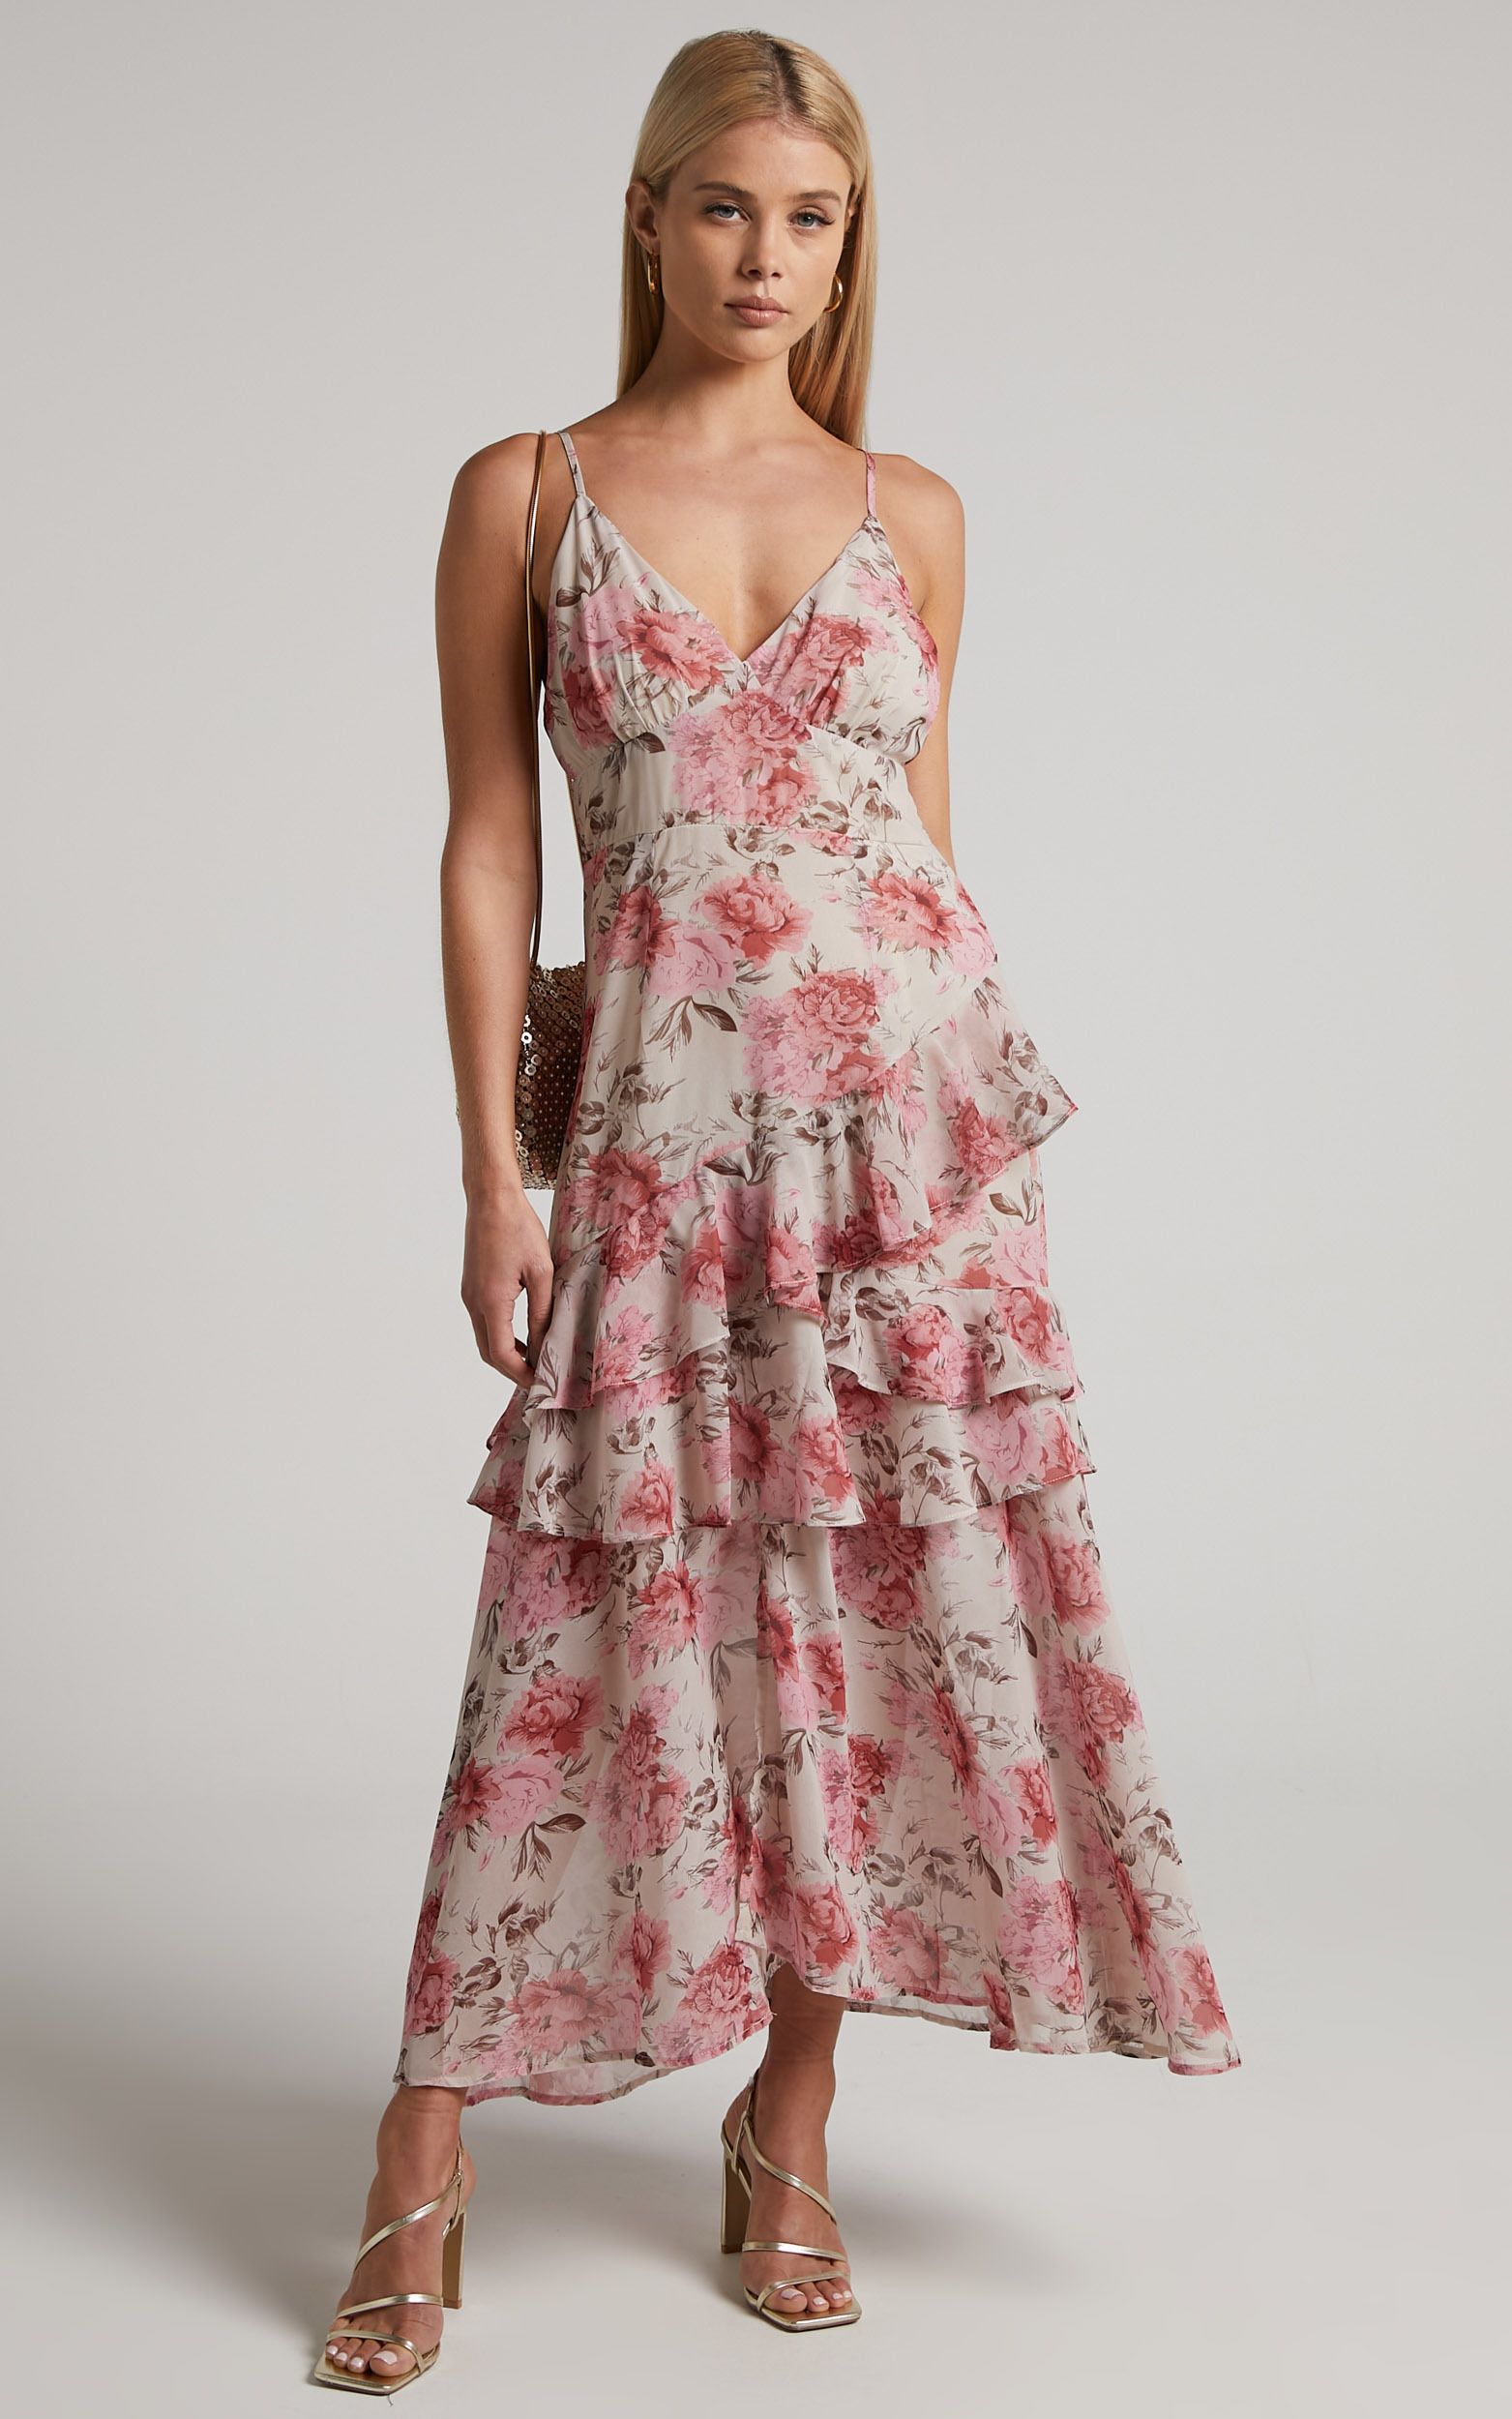 Caliope Maxi Dress - V Neck Tiered Ruffle Dress in Pink Floral | Showpo (US, UK & Europe)